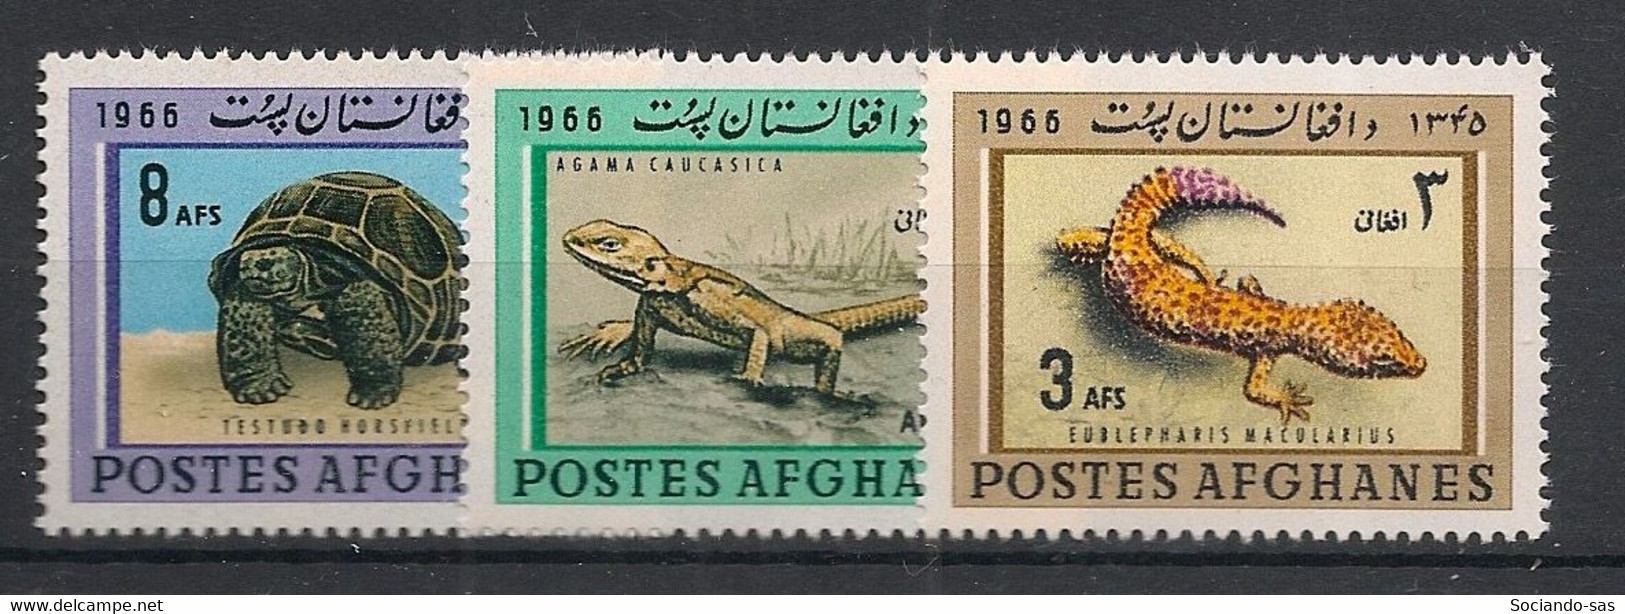 AFGHANISTAN - 1966 - N° YT. 804 à 806 - Reptiles - Neuf Luxe ** / MNH / Postfrisch - Afghanistan